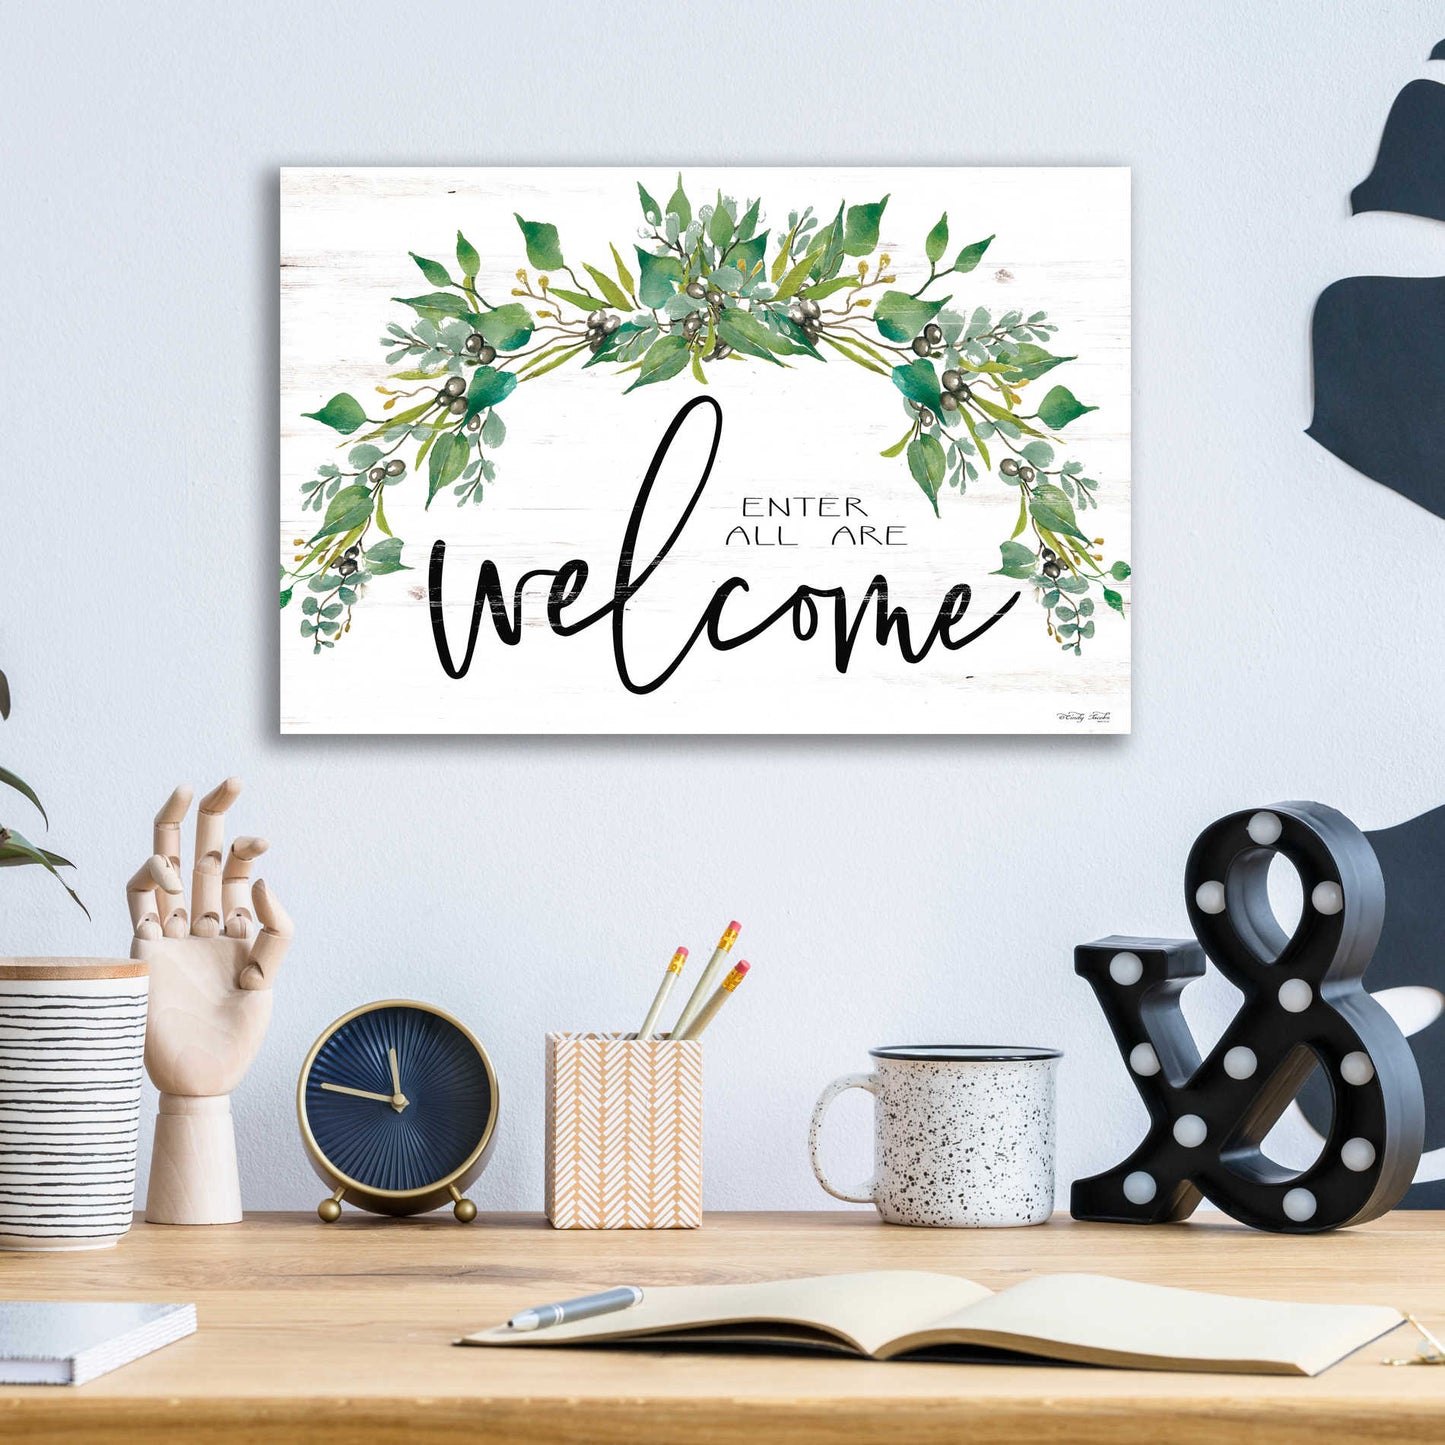 Epic Art 'Enter All Are Welcome' by Cindy Jacobs, Acrylic Glass Wall Art,16x12